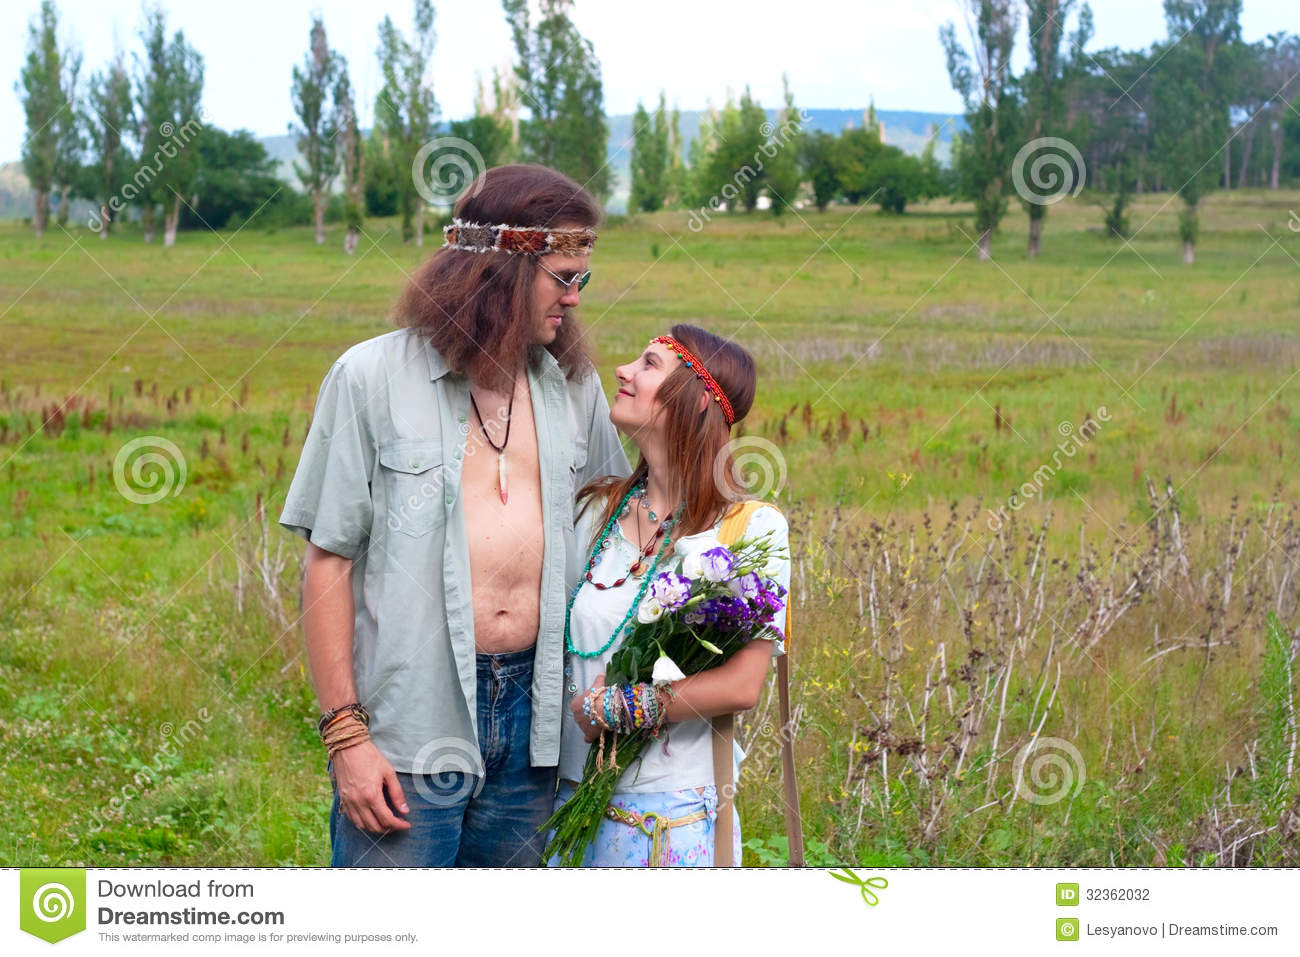 Couple Hippie In Love With Flowers Stock Photography   Image  32362032